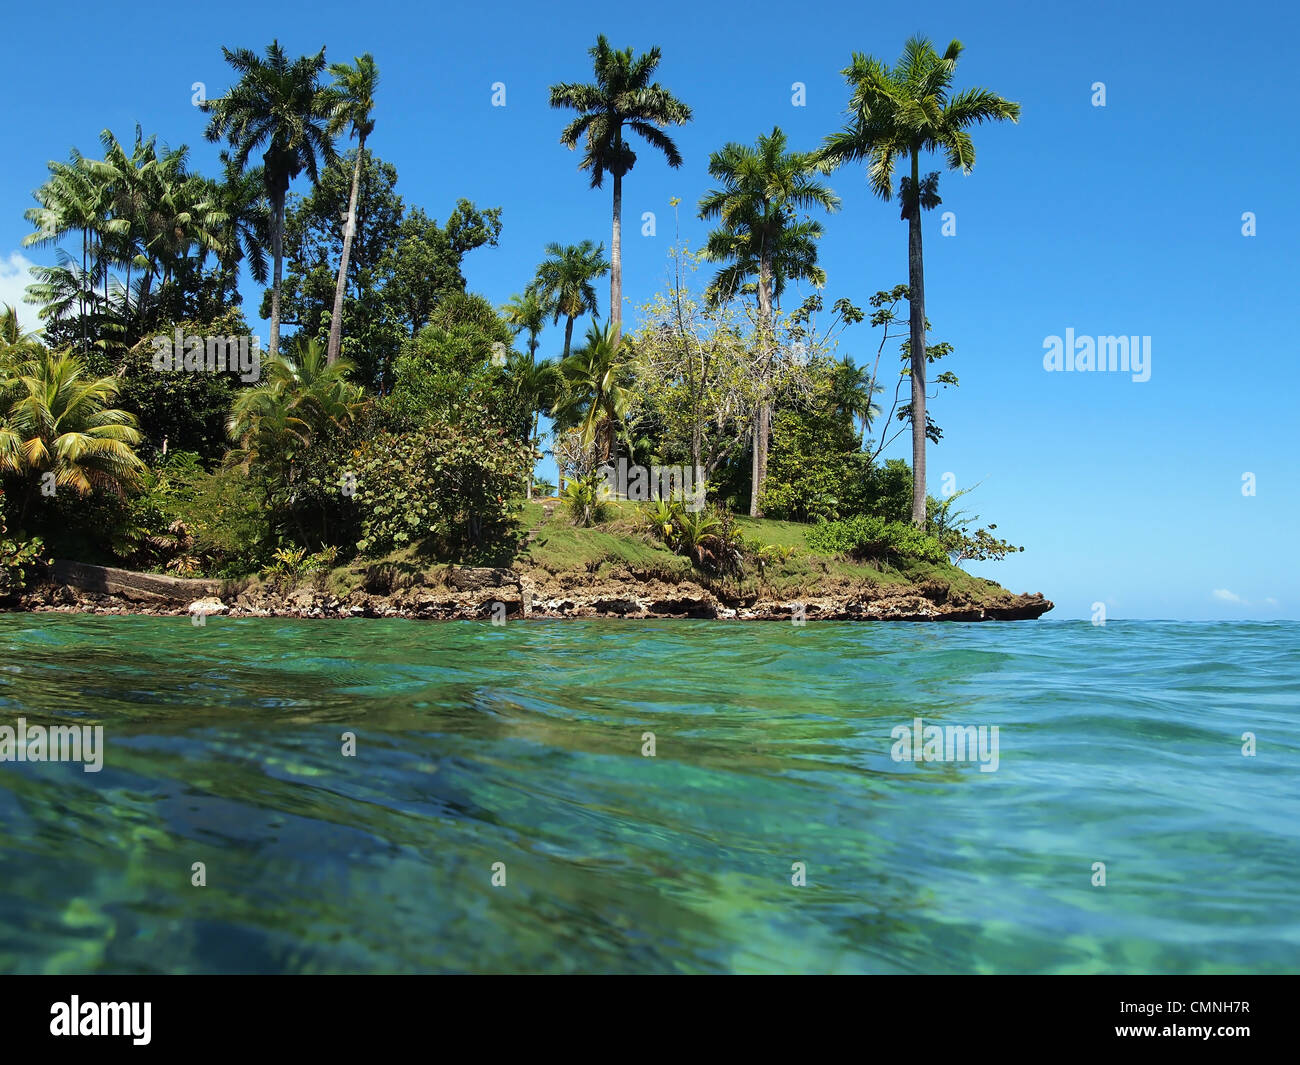 Caribbean island with beautiful tropical vegetation seen from water surface Stock Photo